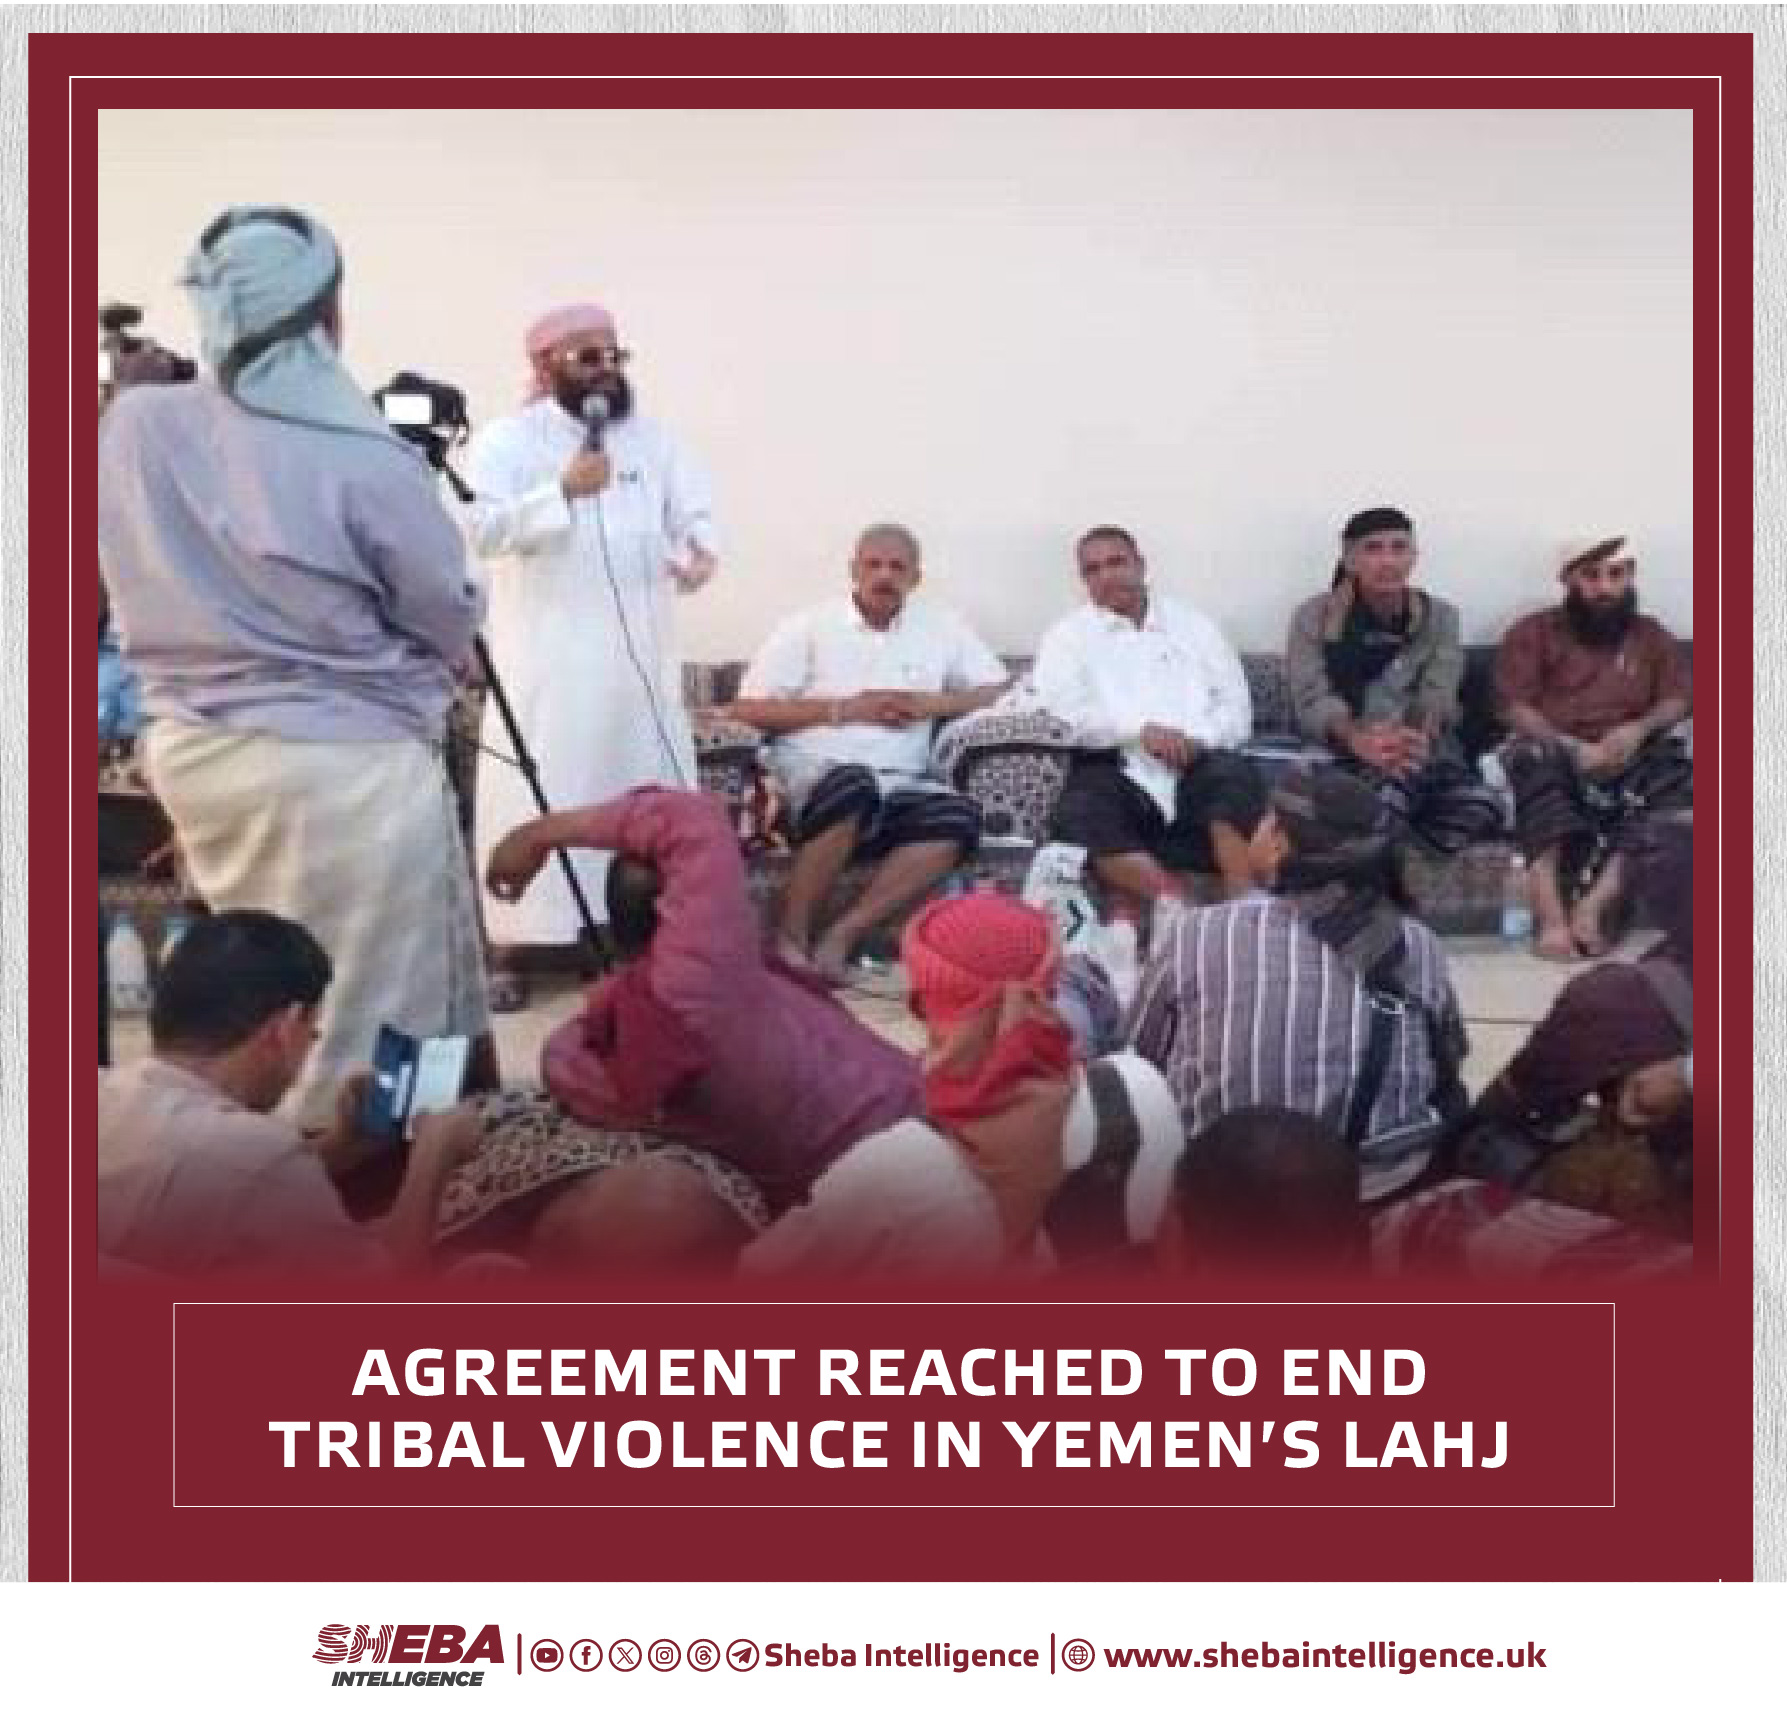 Agreement Reached to End Tribal Violence in Yemen's Lahj